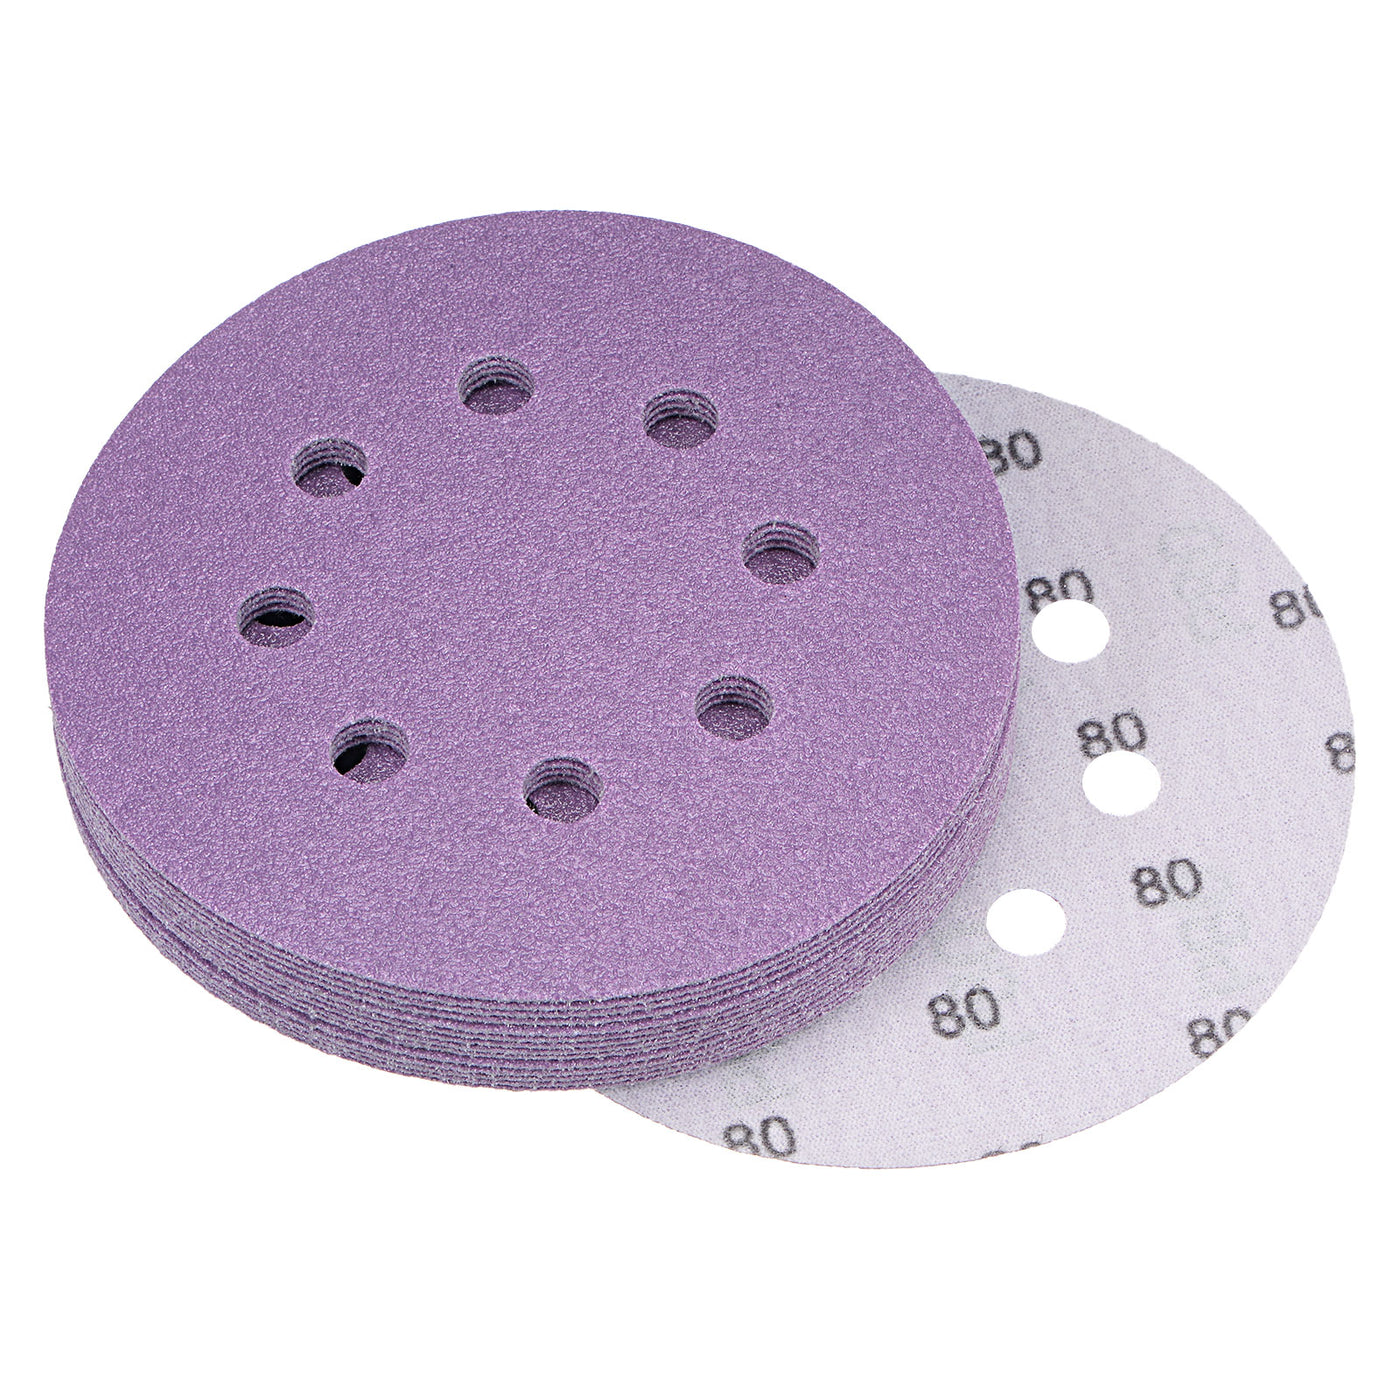 uxcell Uxcell 15Pcs 5-Inch Purple Sanding Discs 10000 Grit 8 Hole Hook and Loop Sand Paper